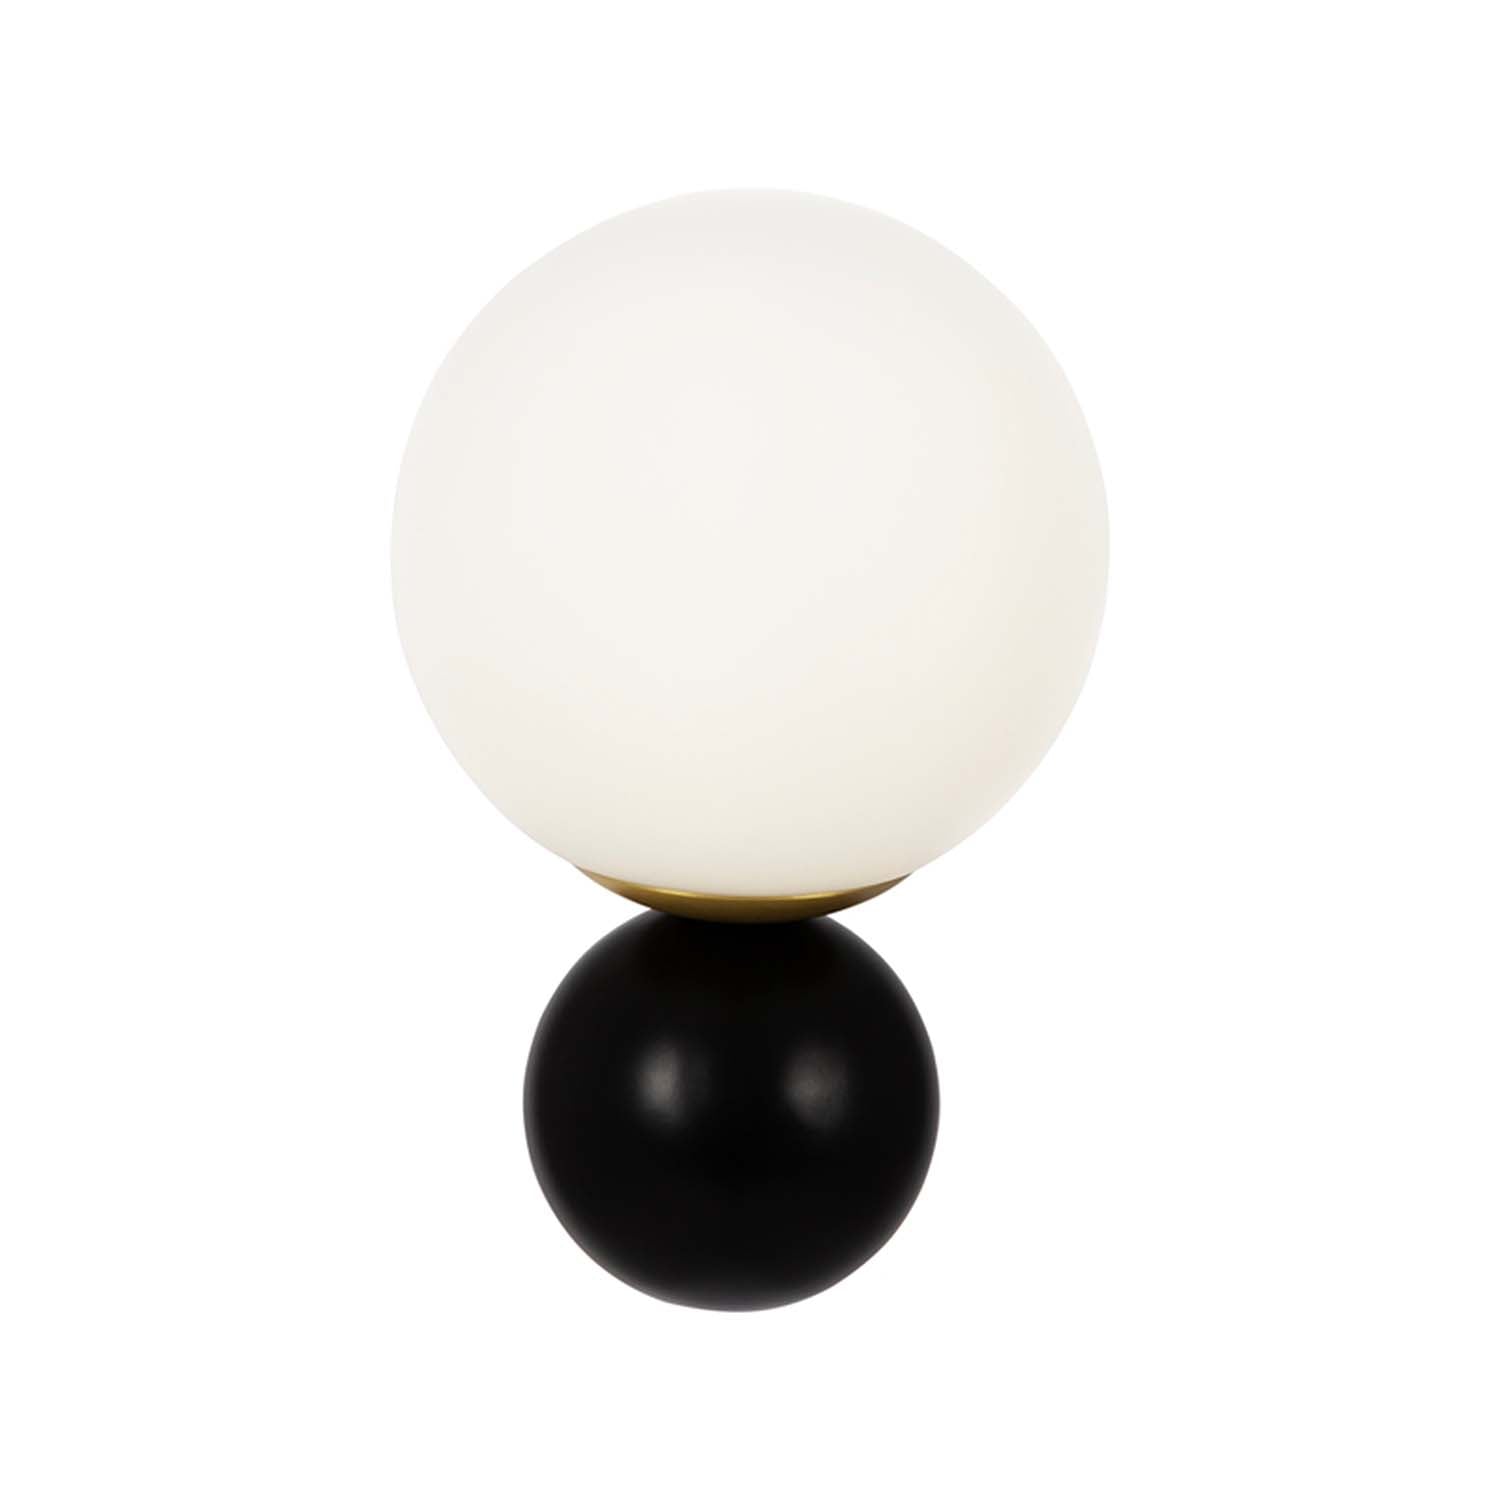 NOSTALGIA A - Art deco wall light with glass balls, gold and black